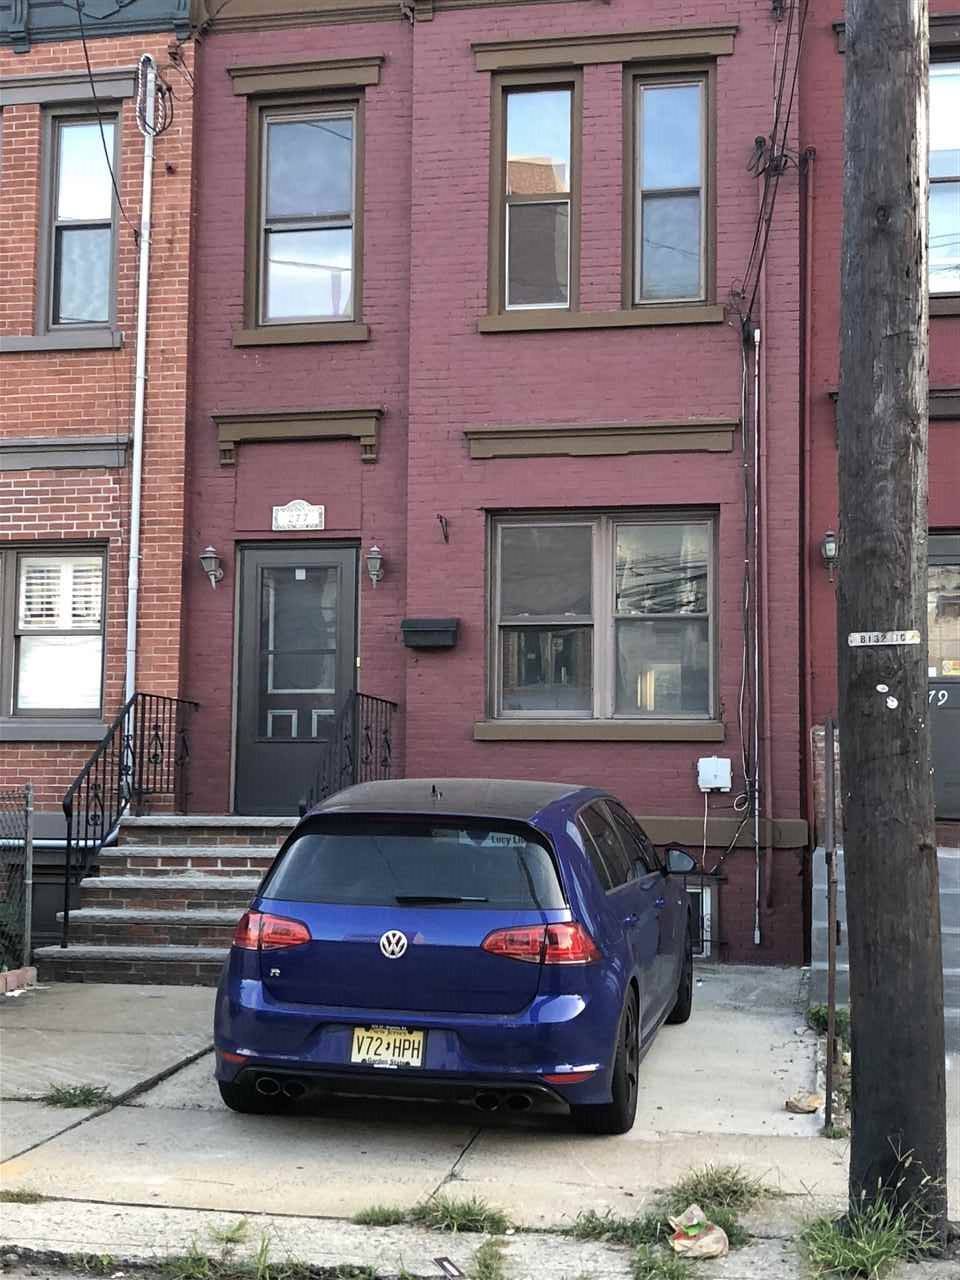 Fully renovated brownstone a stones throw away from Journal Square path and centrally located in Jersey City